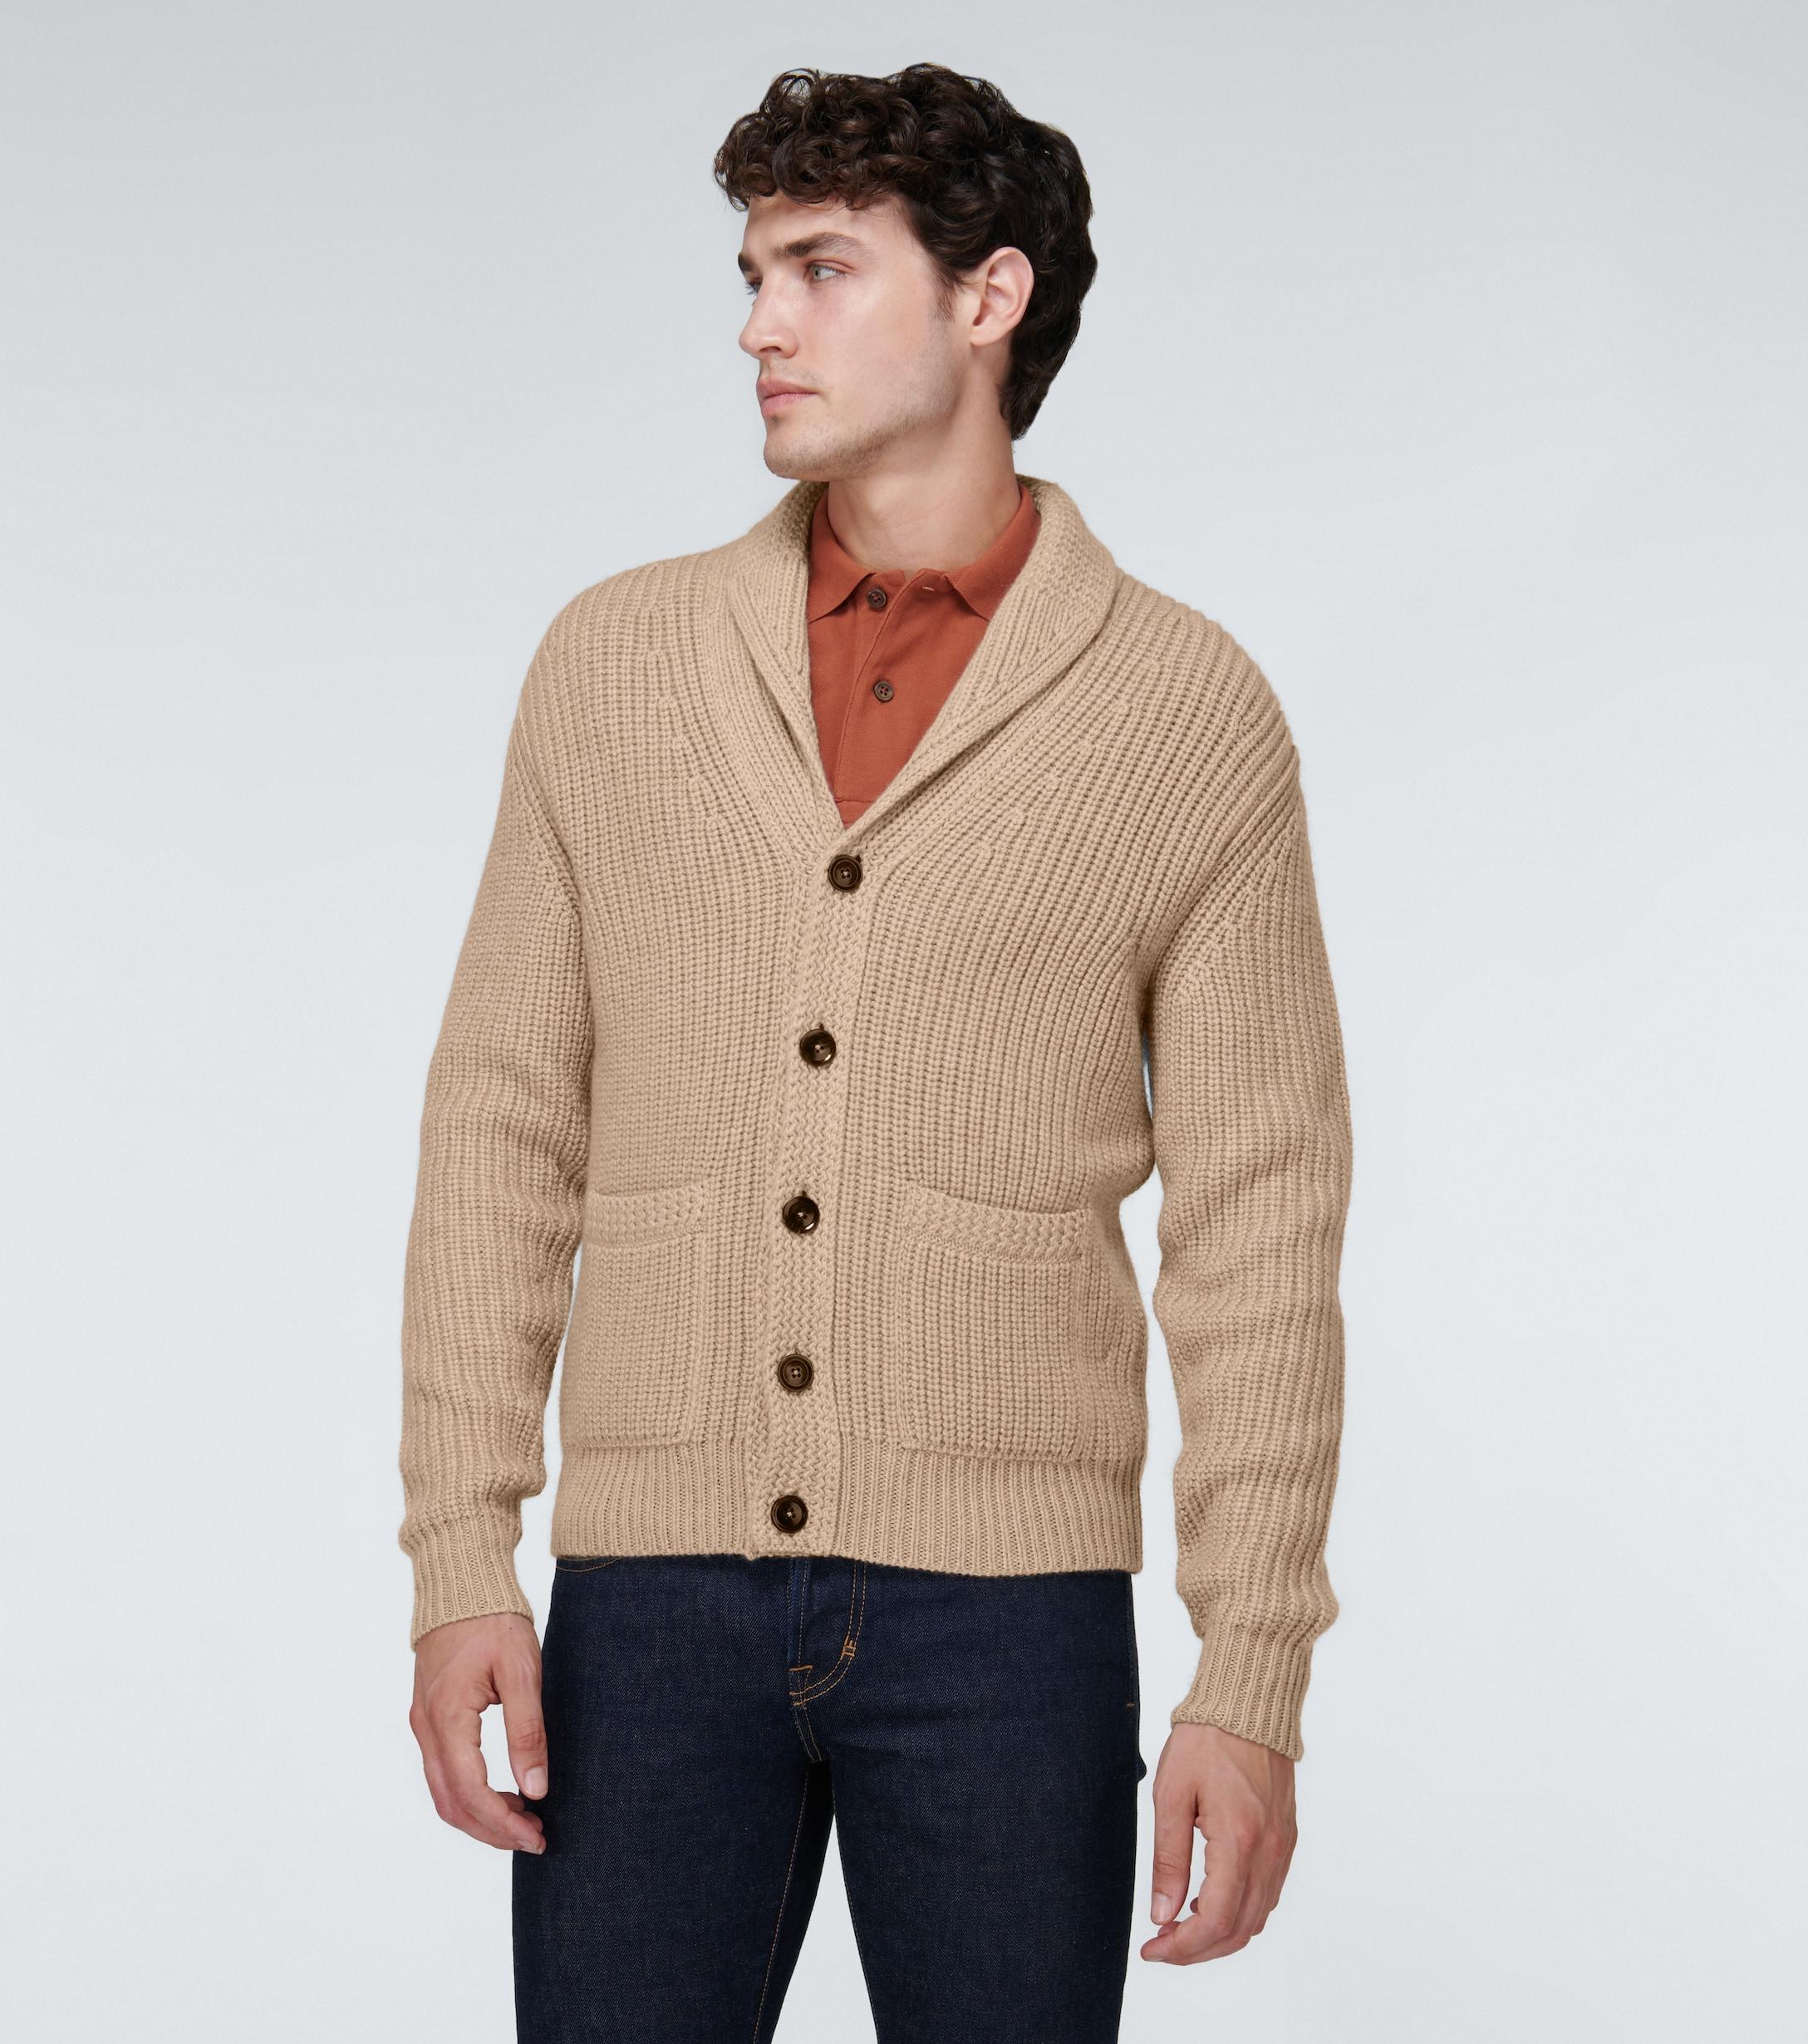 Tom Ford Cashmere And Mohair Cardigan in Beige (Natural) for Men - Lyst